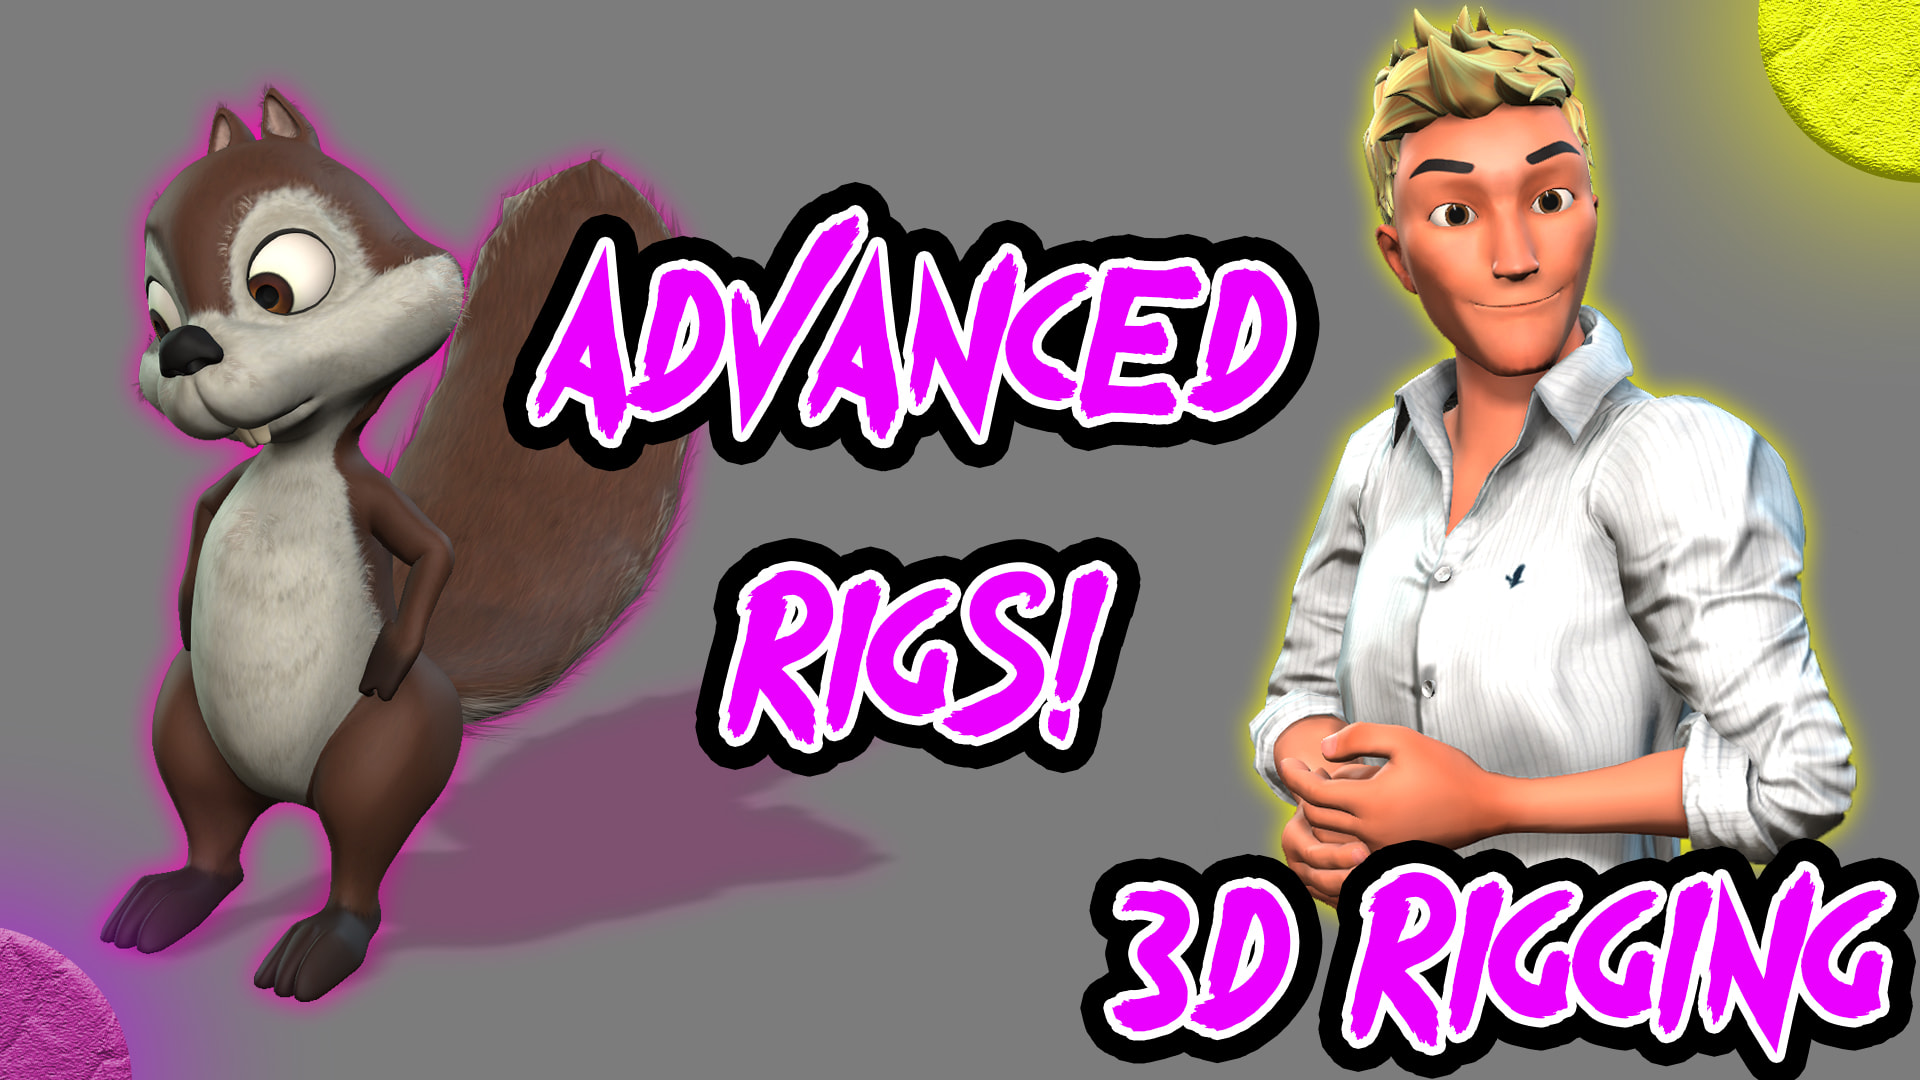 Do 3d character rigging in blender on a reasonable price by Designer_ok |  Fiverr